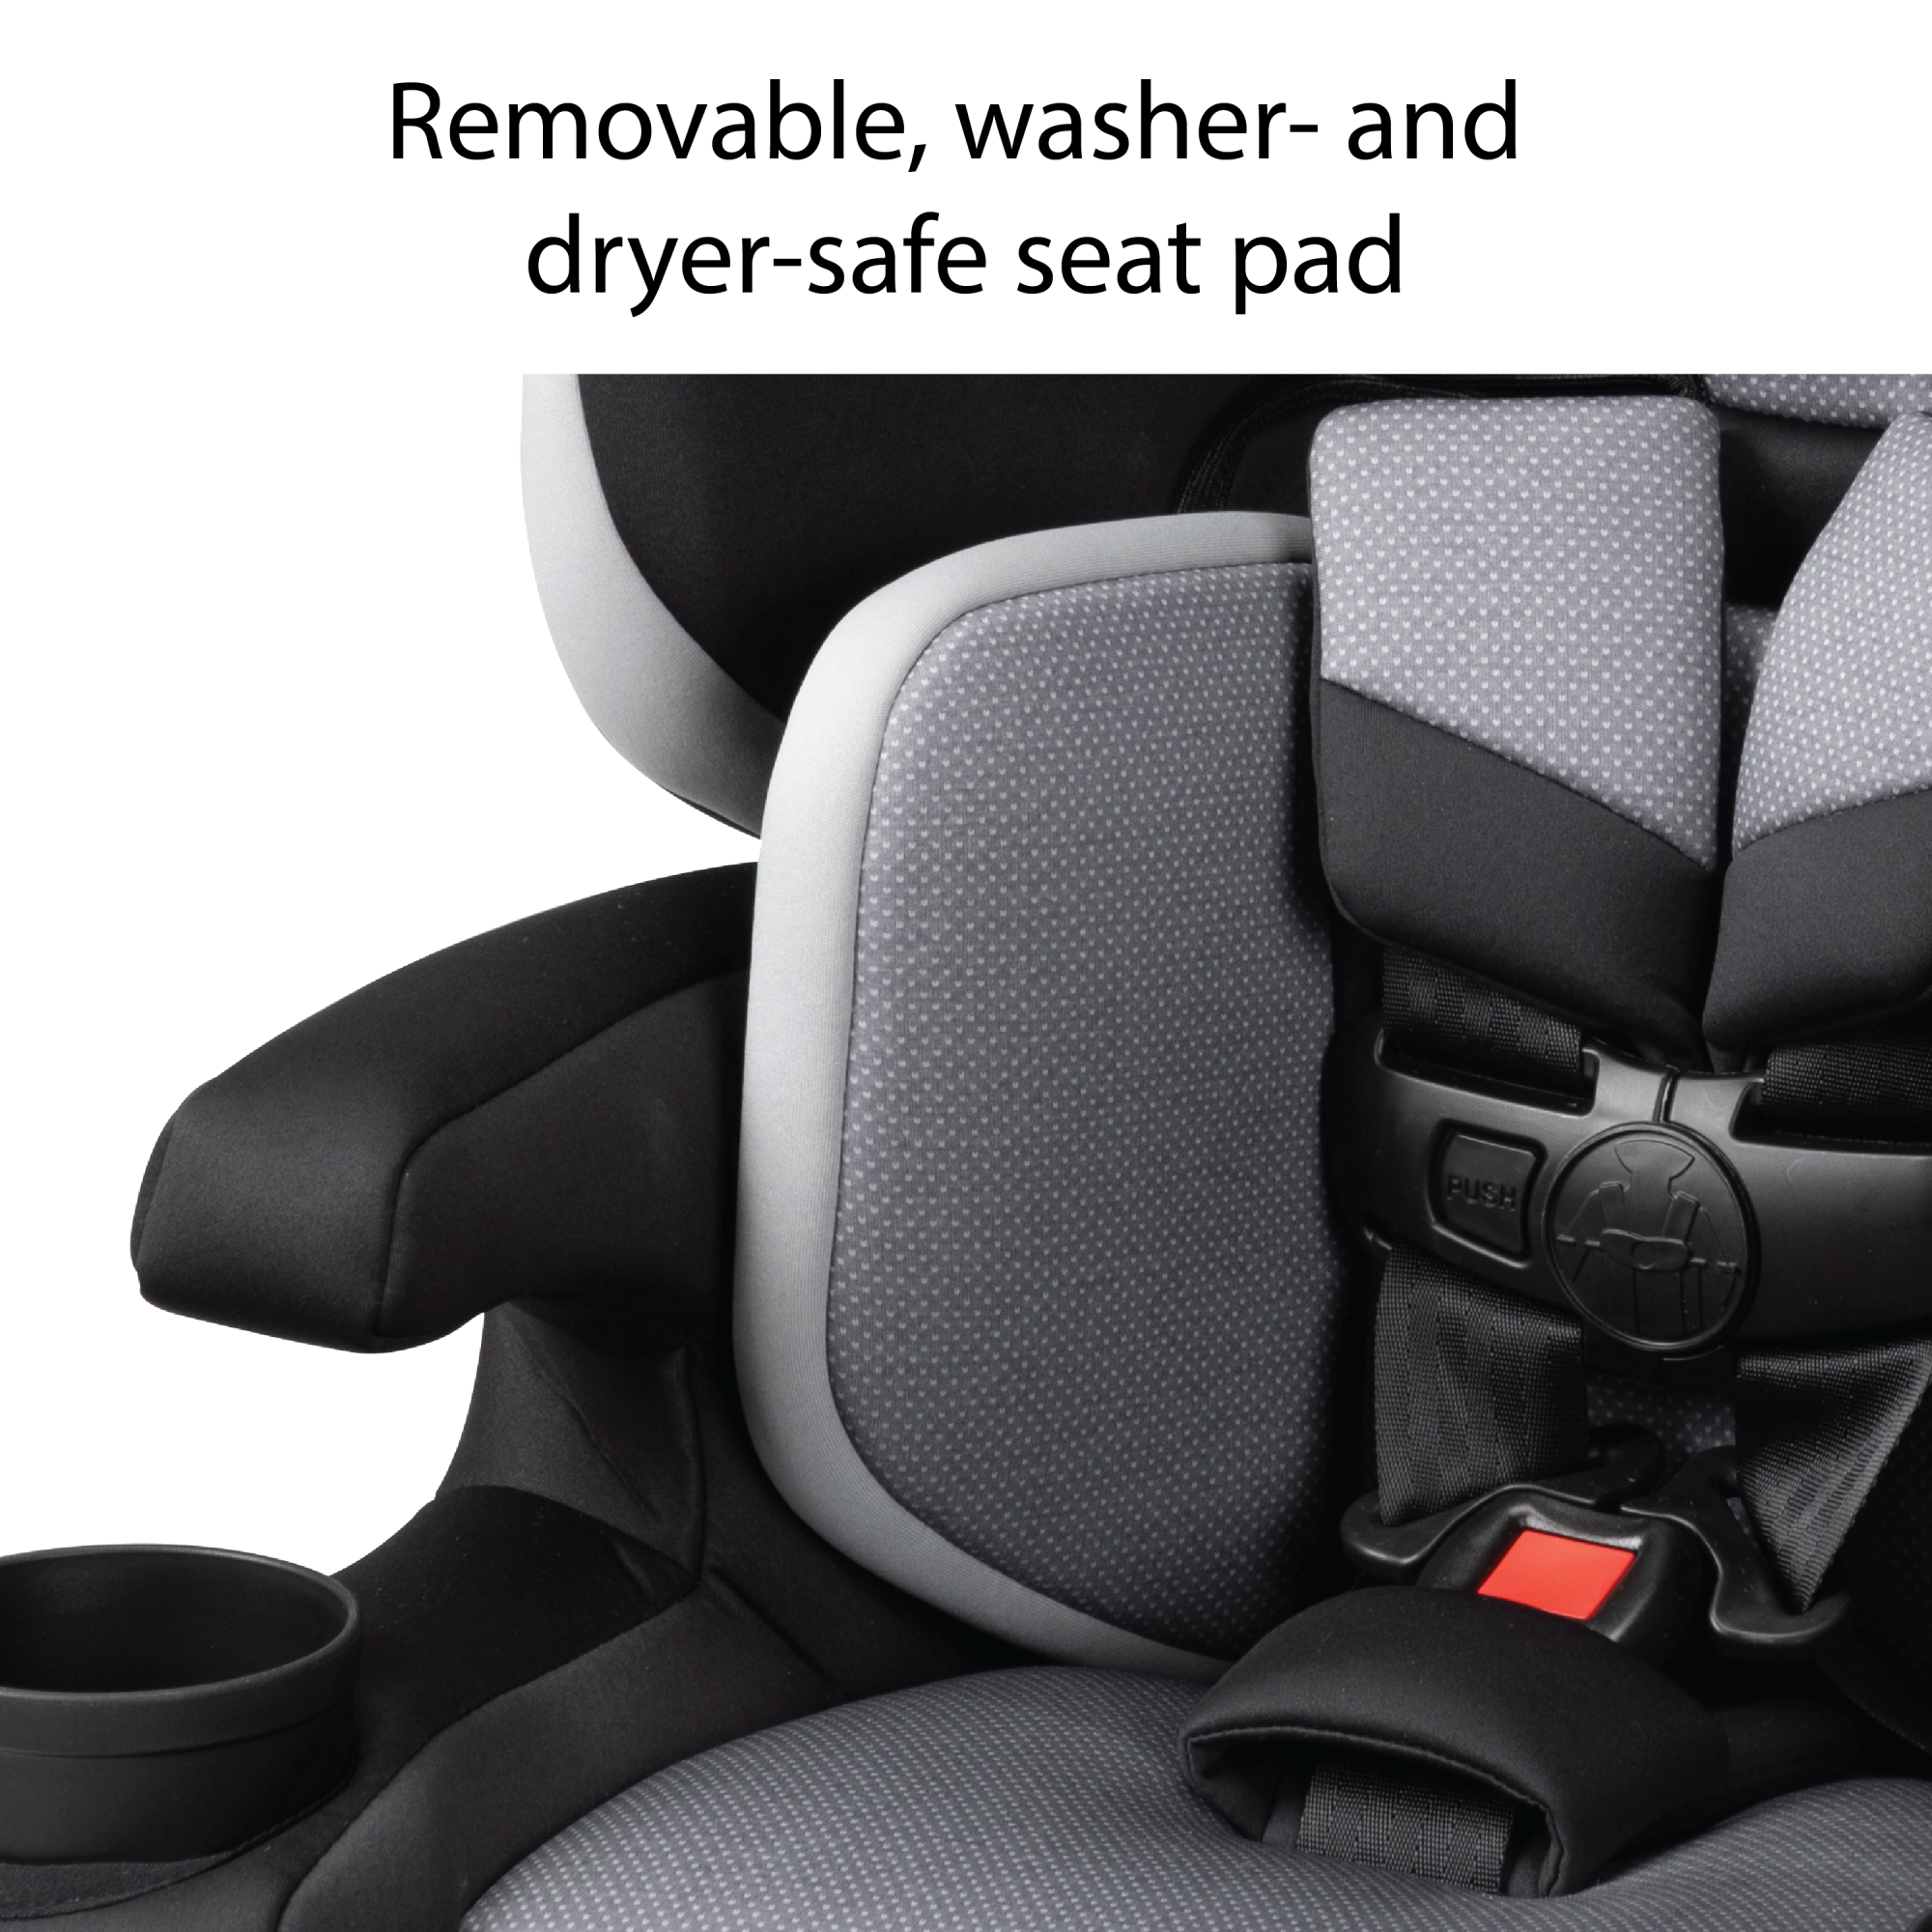 Boost-and-Go All-in-One Harness Booster Car Seat - removable, washer-and-dryer-safe seat pad